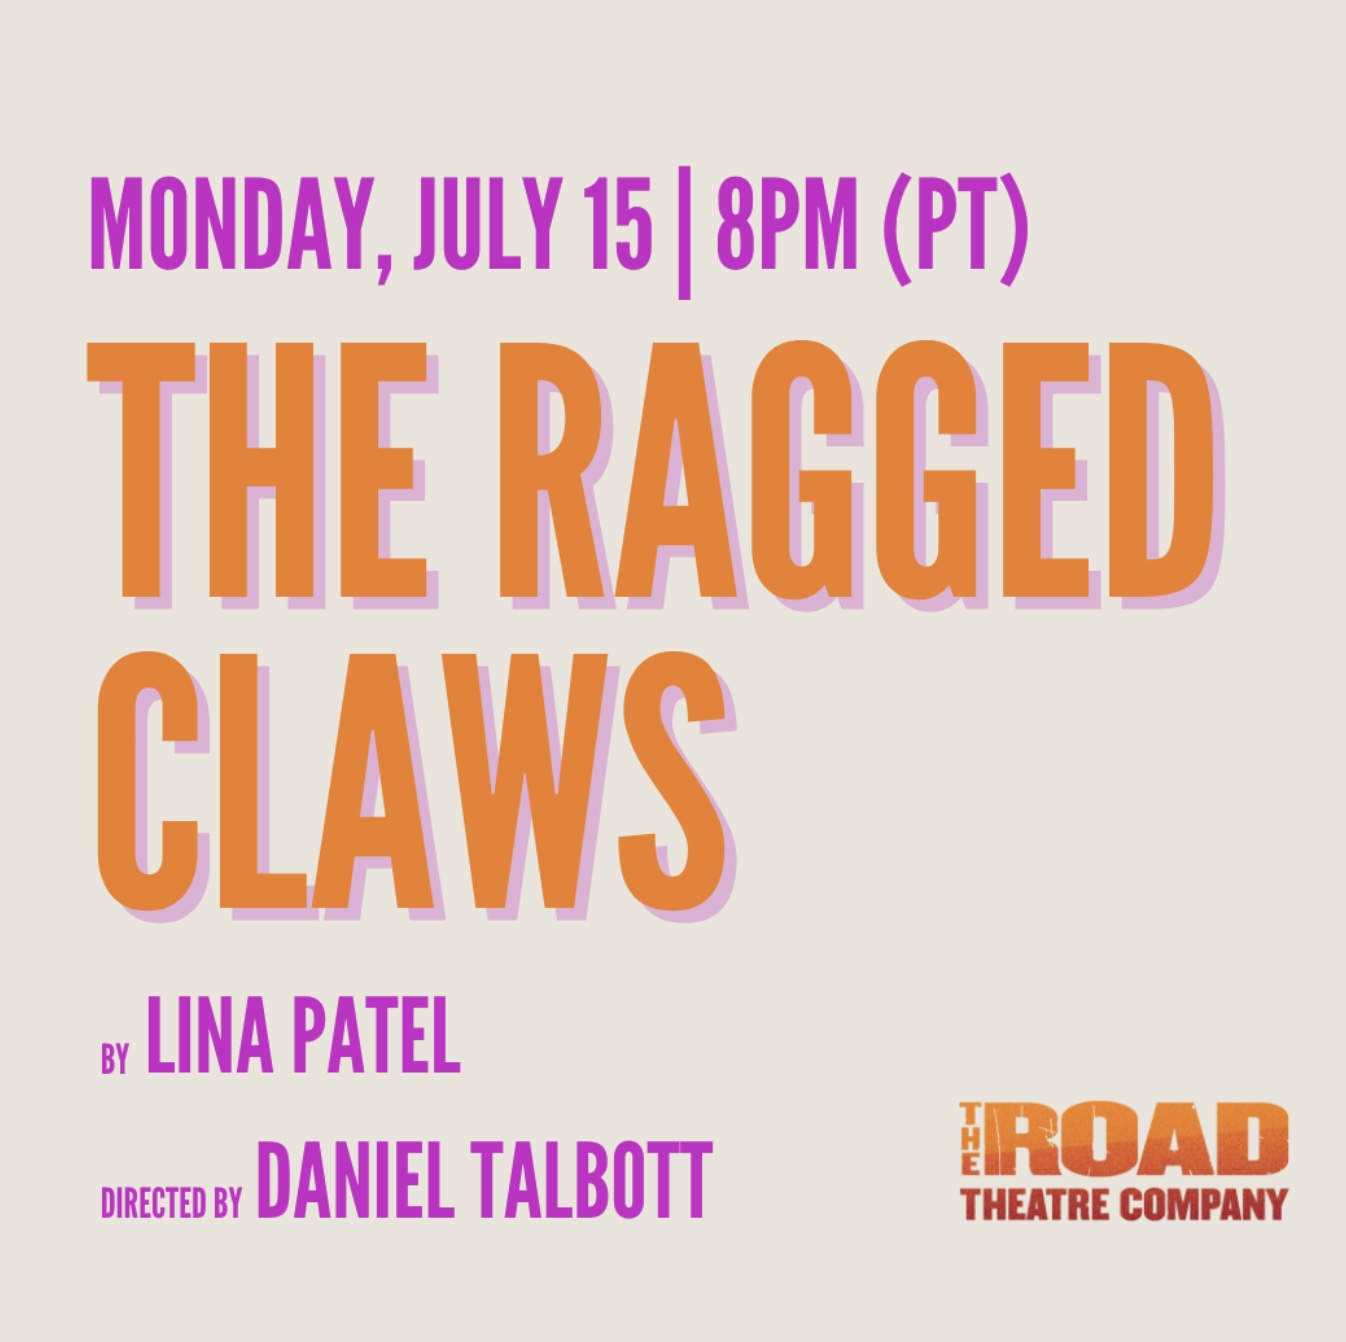 The Ragged claws promo art